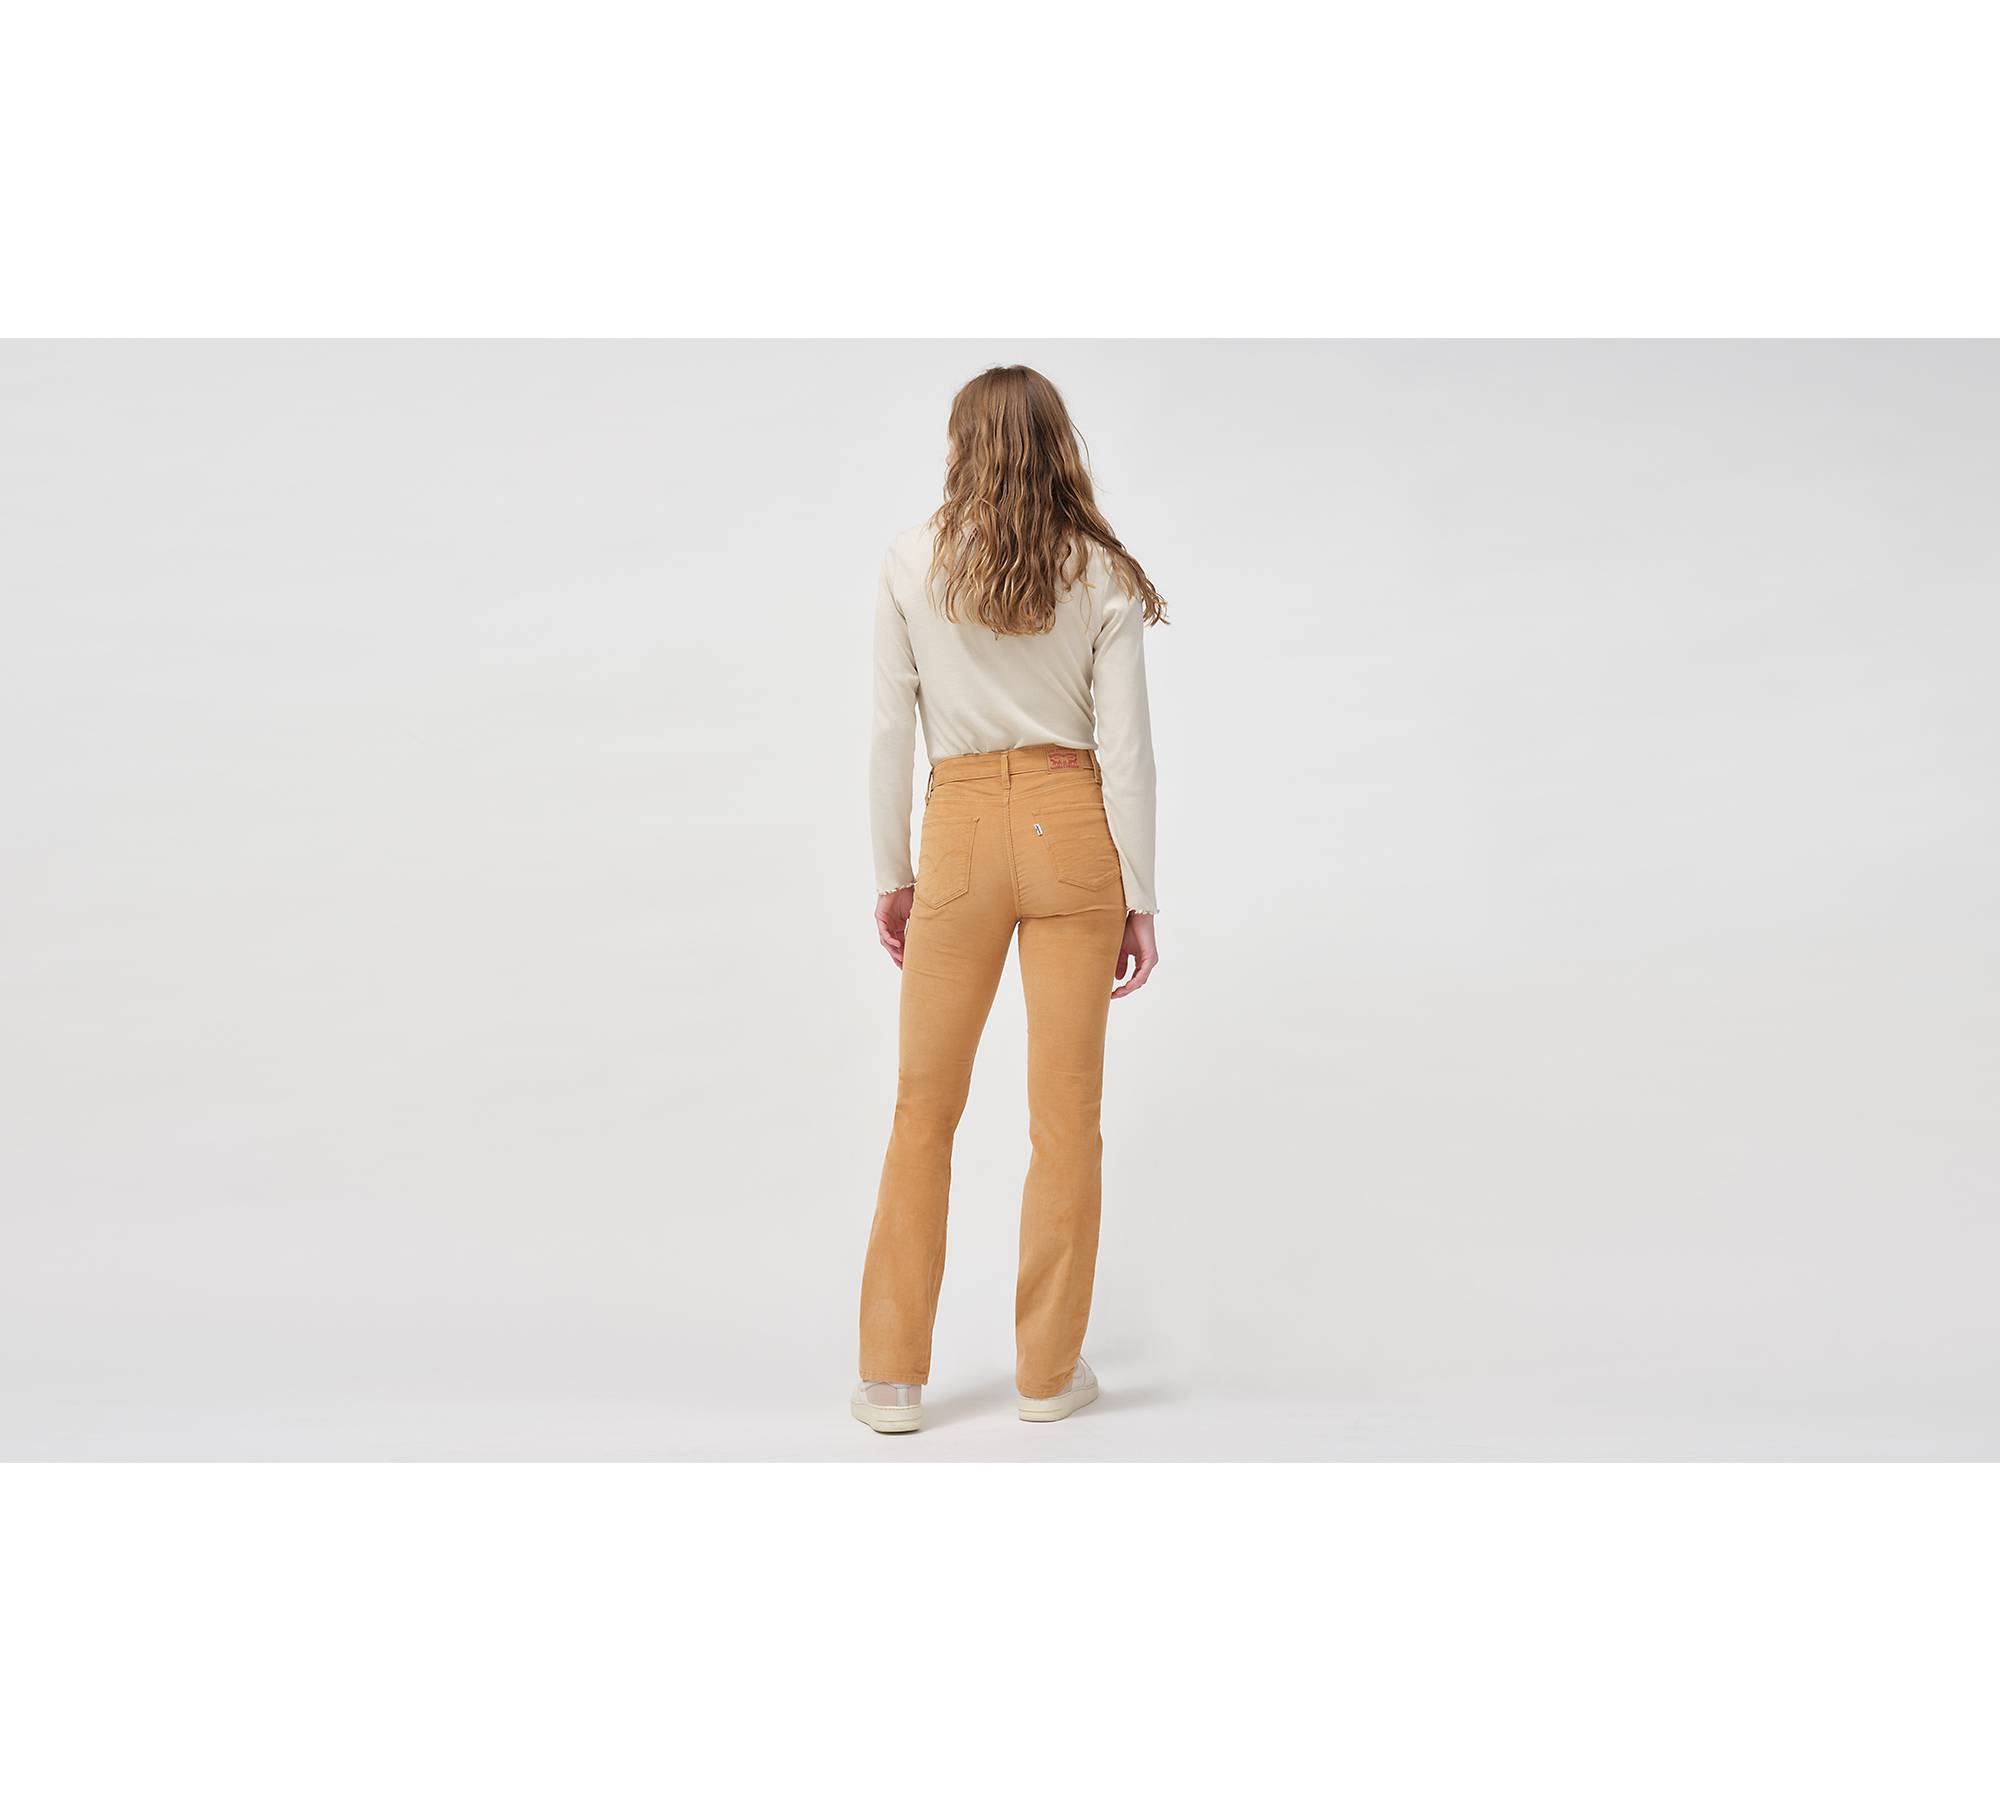 Product Name: Levi's Women's High Rise 725 Bootcut Corduroy Jeans